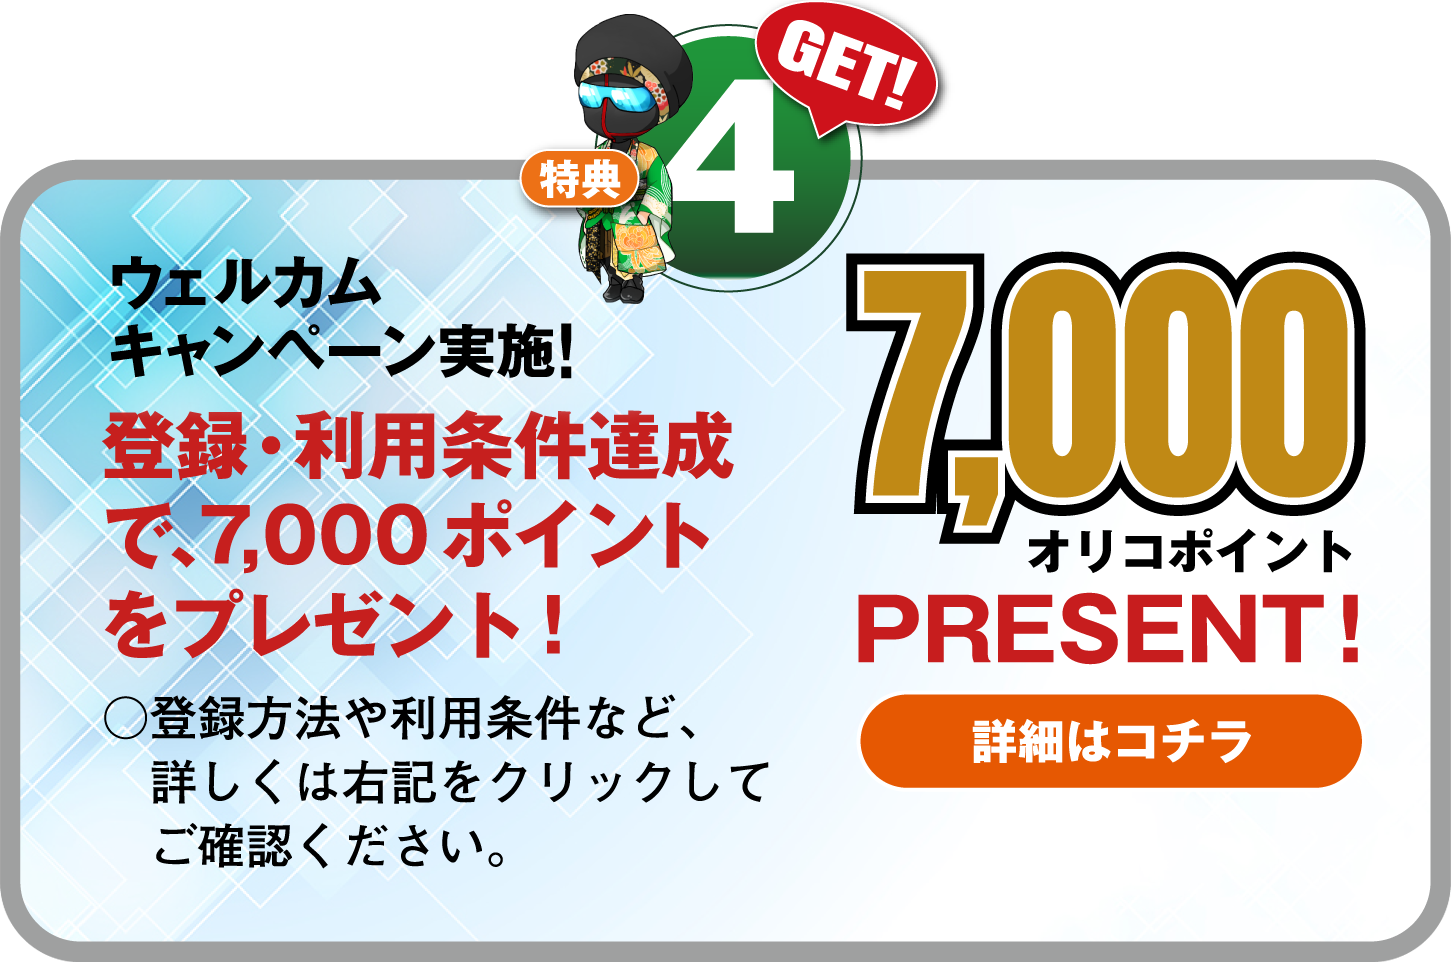 Get!4：WELCOMEキャンペーン実施！ 登録･利用条件達成で､7,000ポイントをプレゼント！